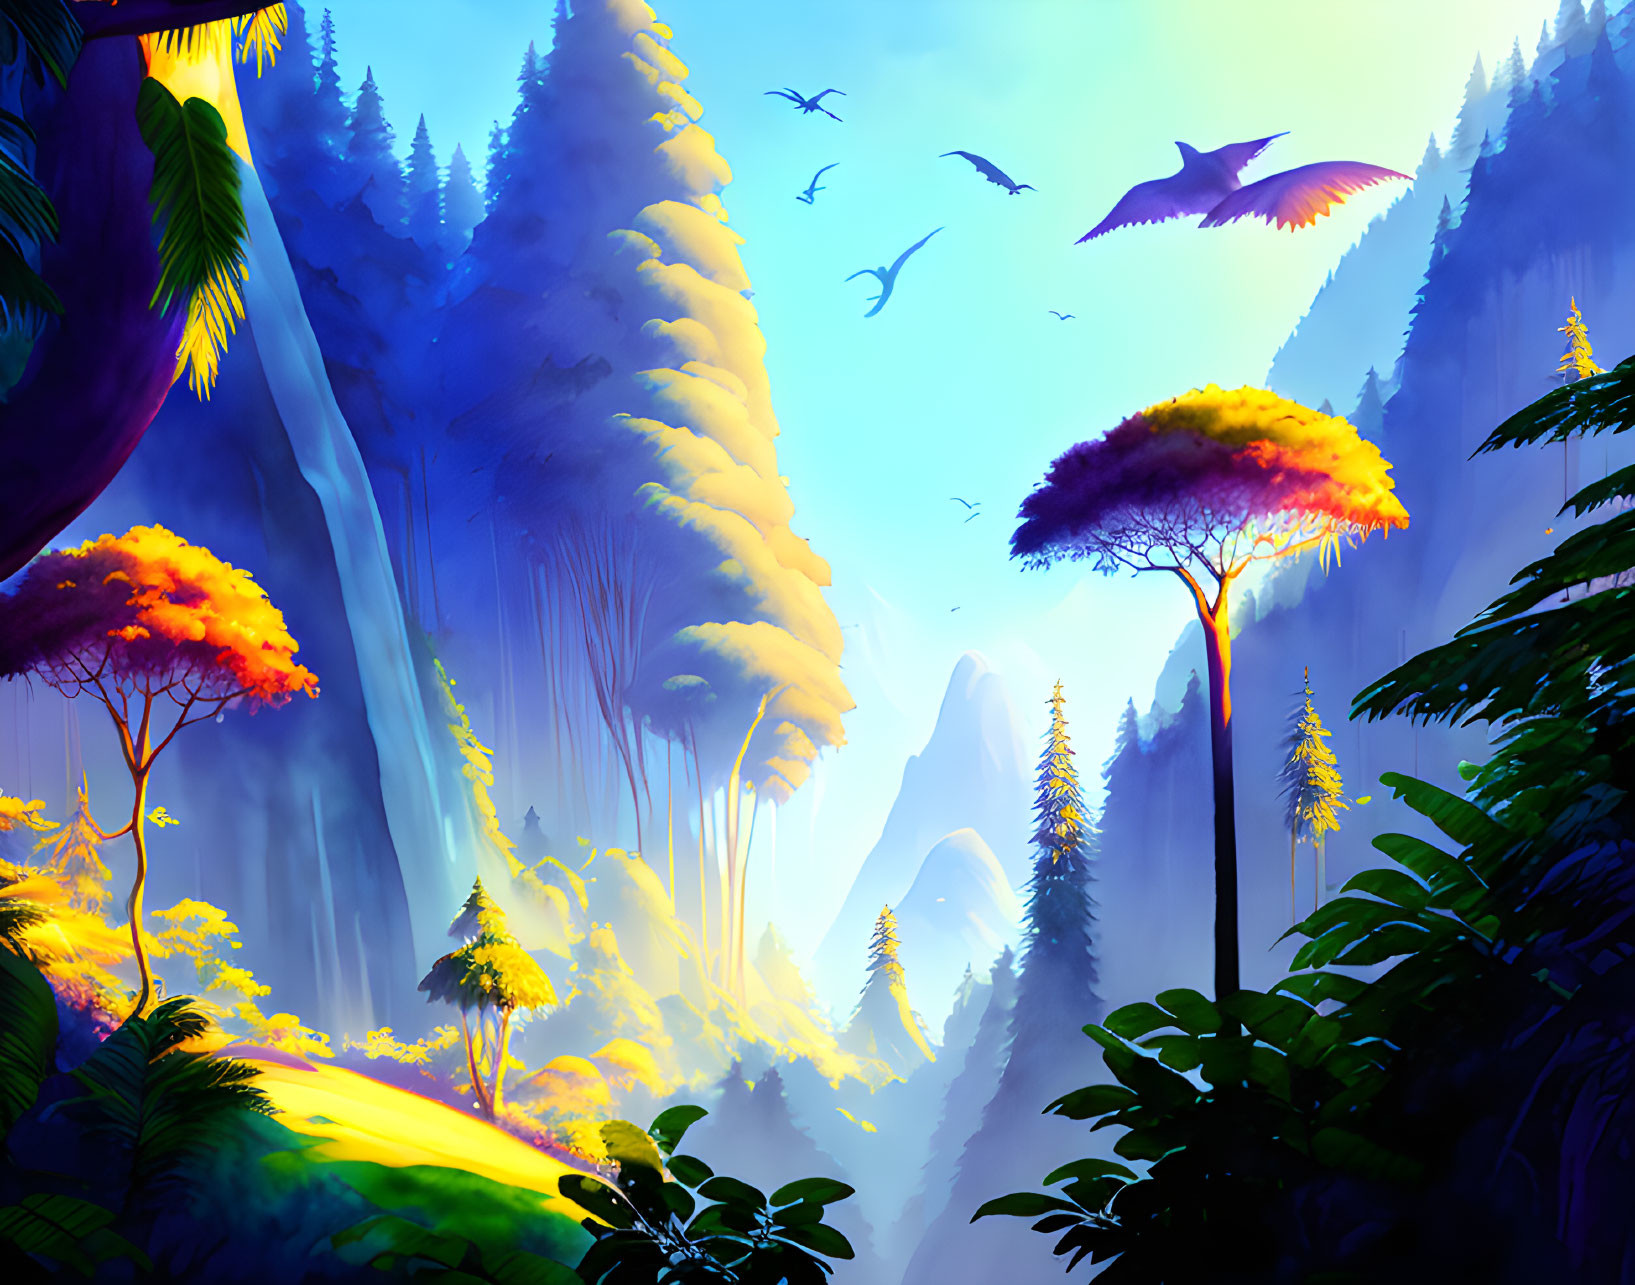 Colorful fantasy landscape with luminous trees, waterfalls, birds, and mountains